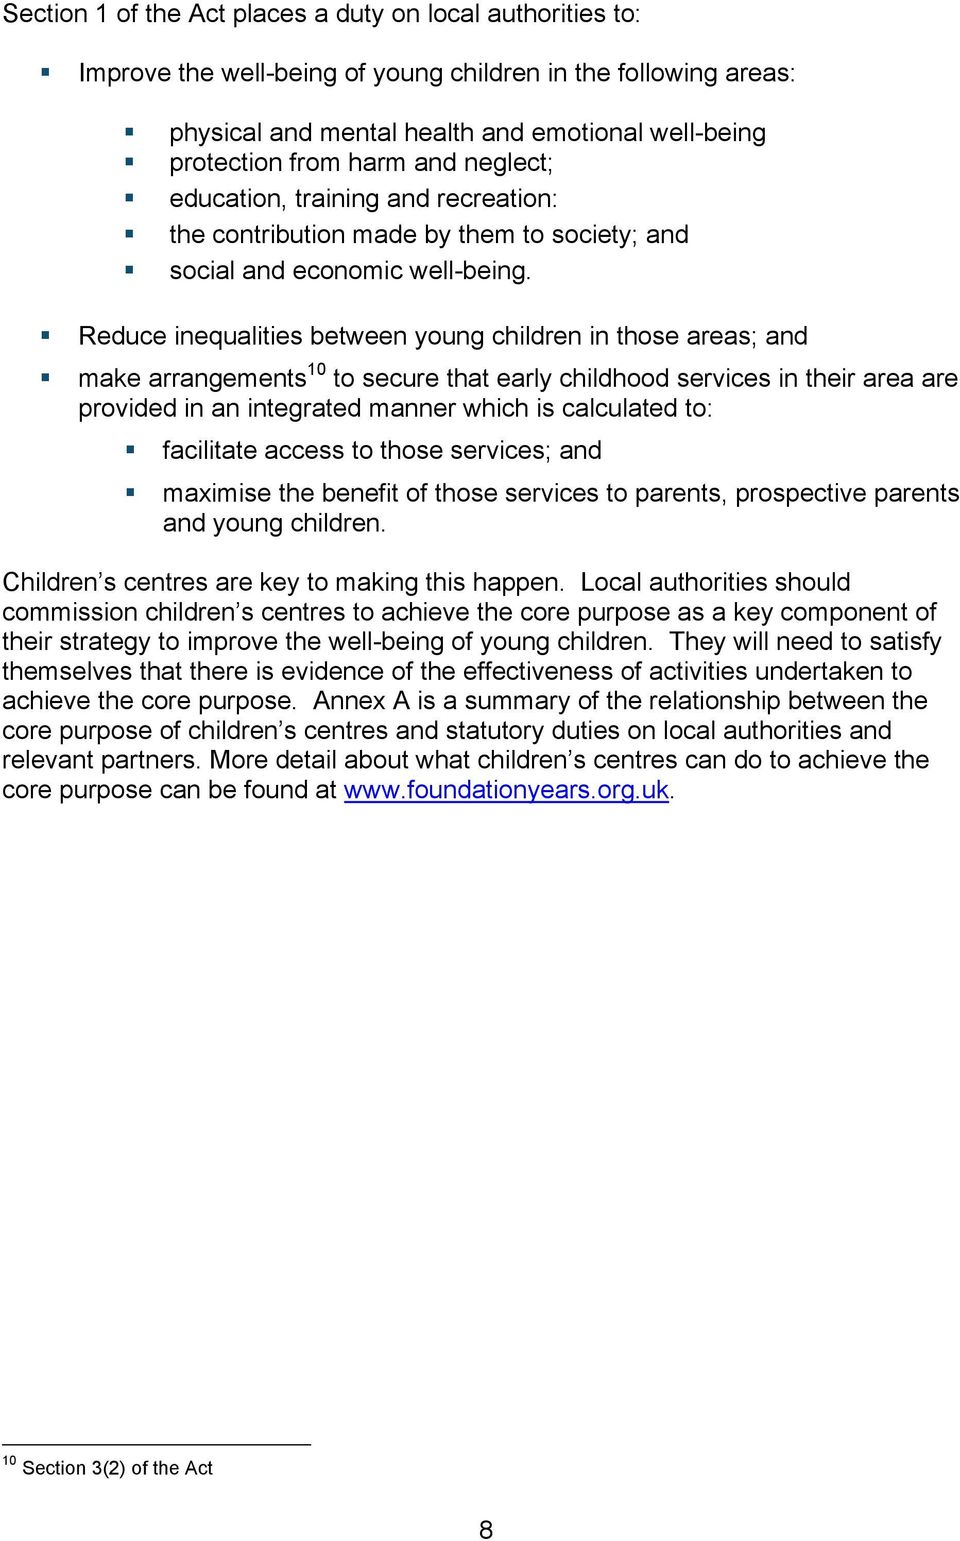 Reduce inequalities between young children in those areas; and make arrangements 10 to secure that early childhood services in their area are provided in an integrated manner which is calculated to: